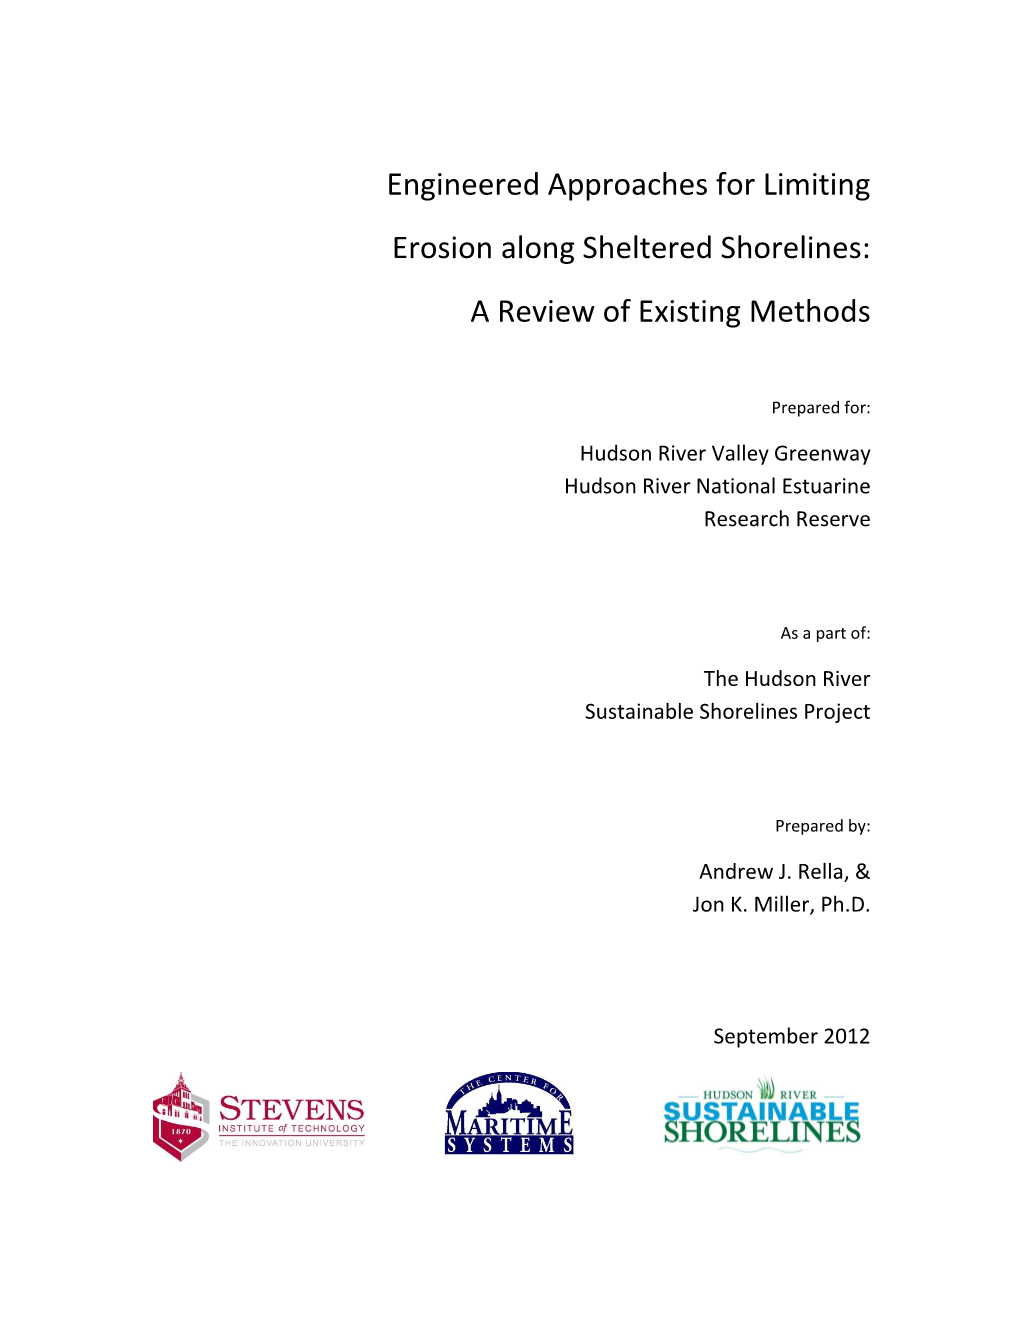 Engineered Approaches for Limiting Erosion Along Sheltered Shorelines: a Review of Existing Methods